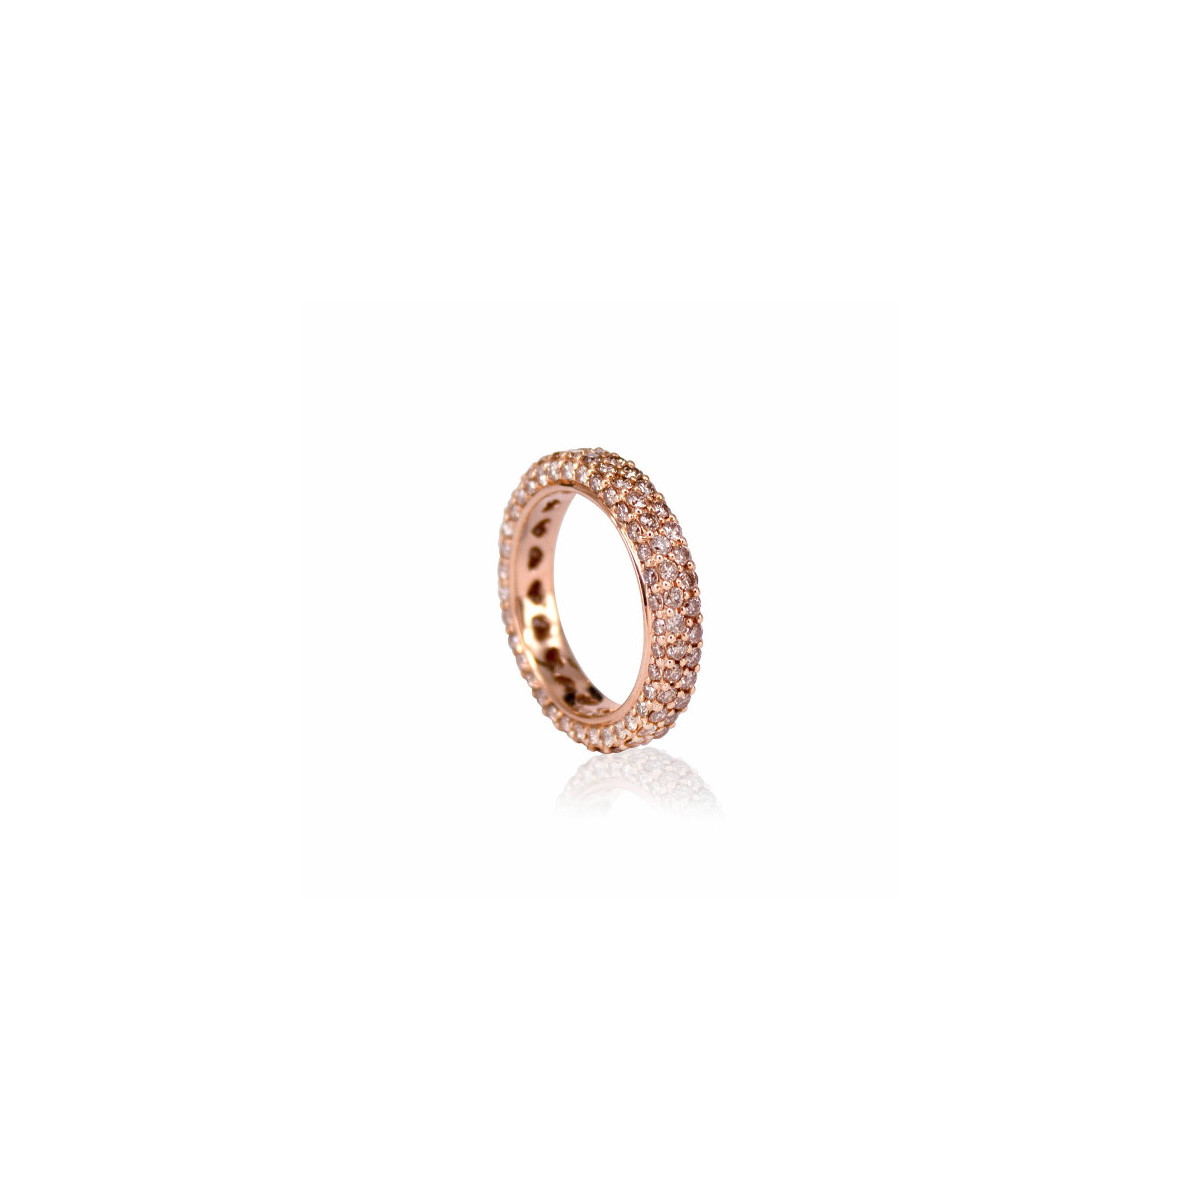 COMPLETE RING OF DIAMONDS BROWN